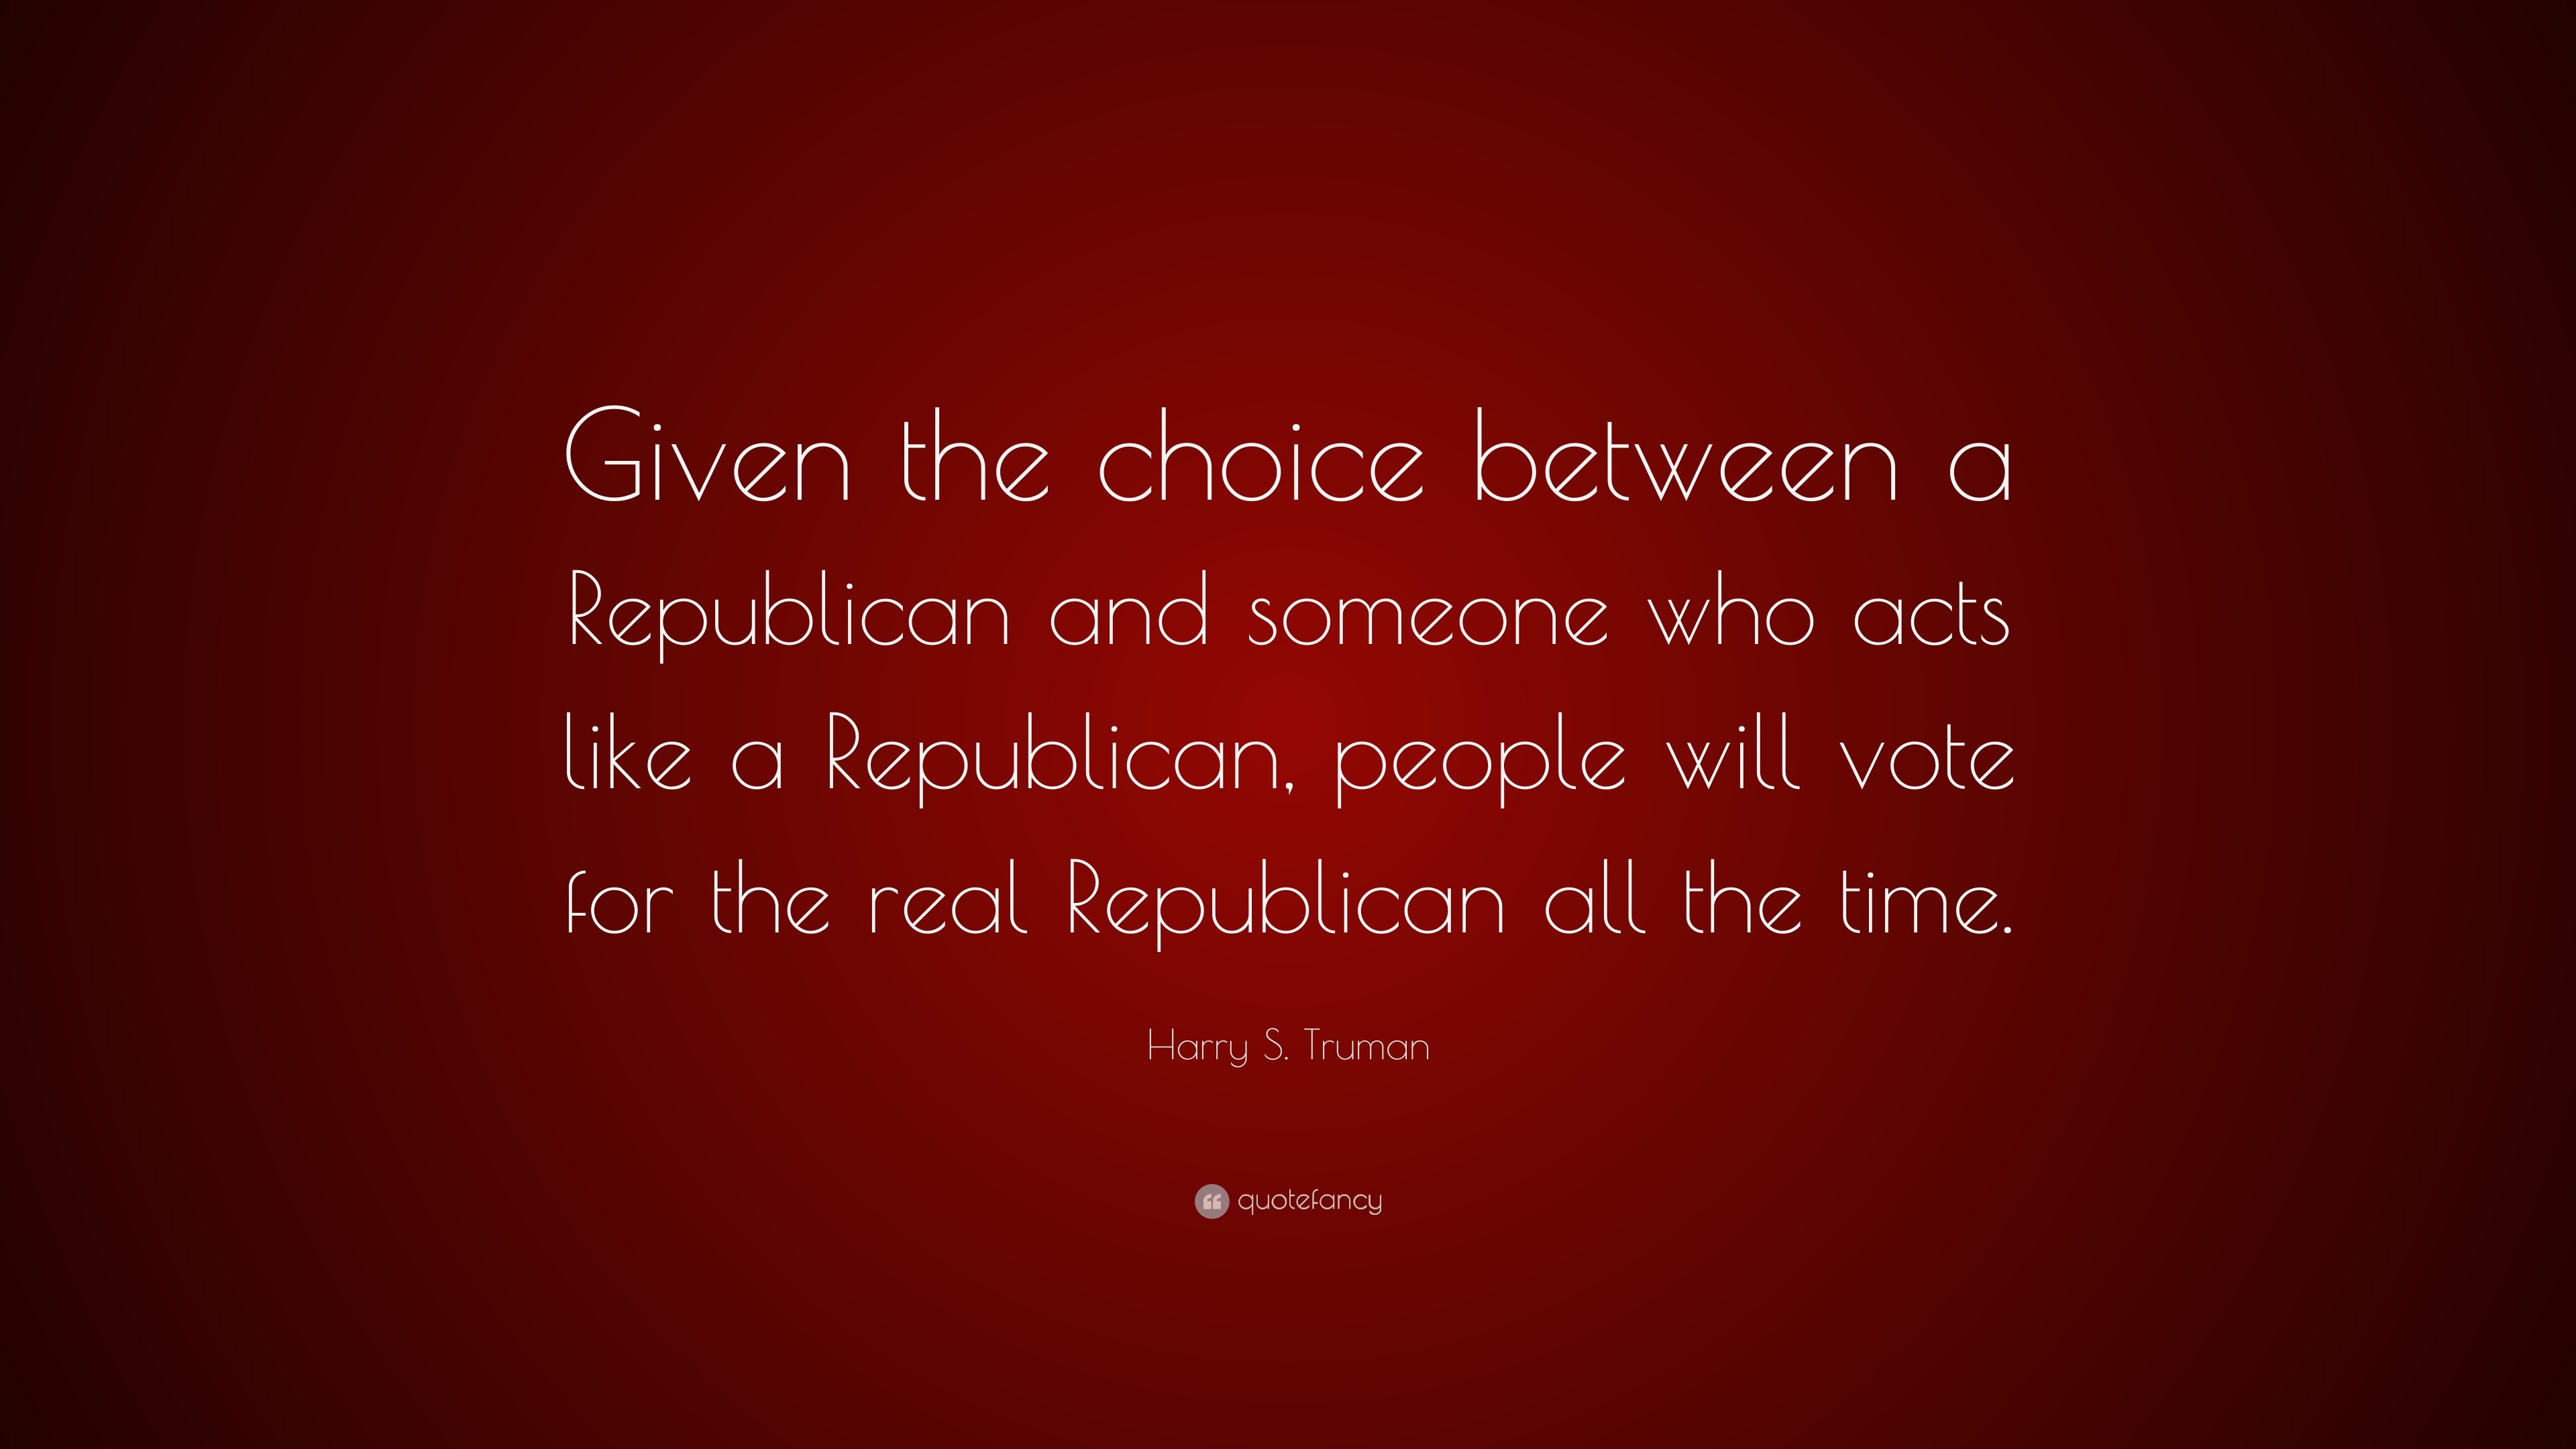 3840x2160 Harry S. Truman Quote: “Given the choice between a Republican and someone  who